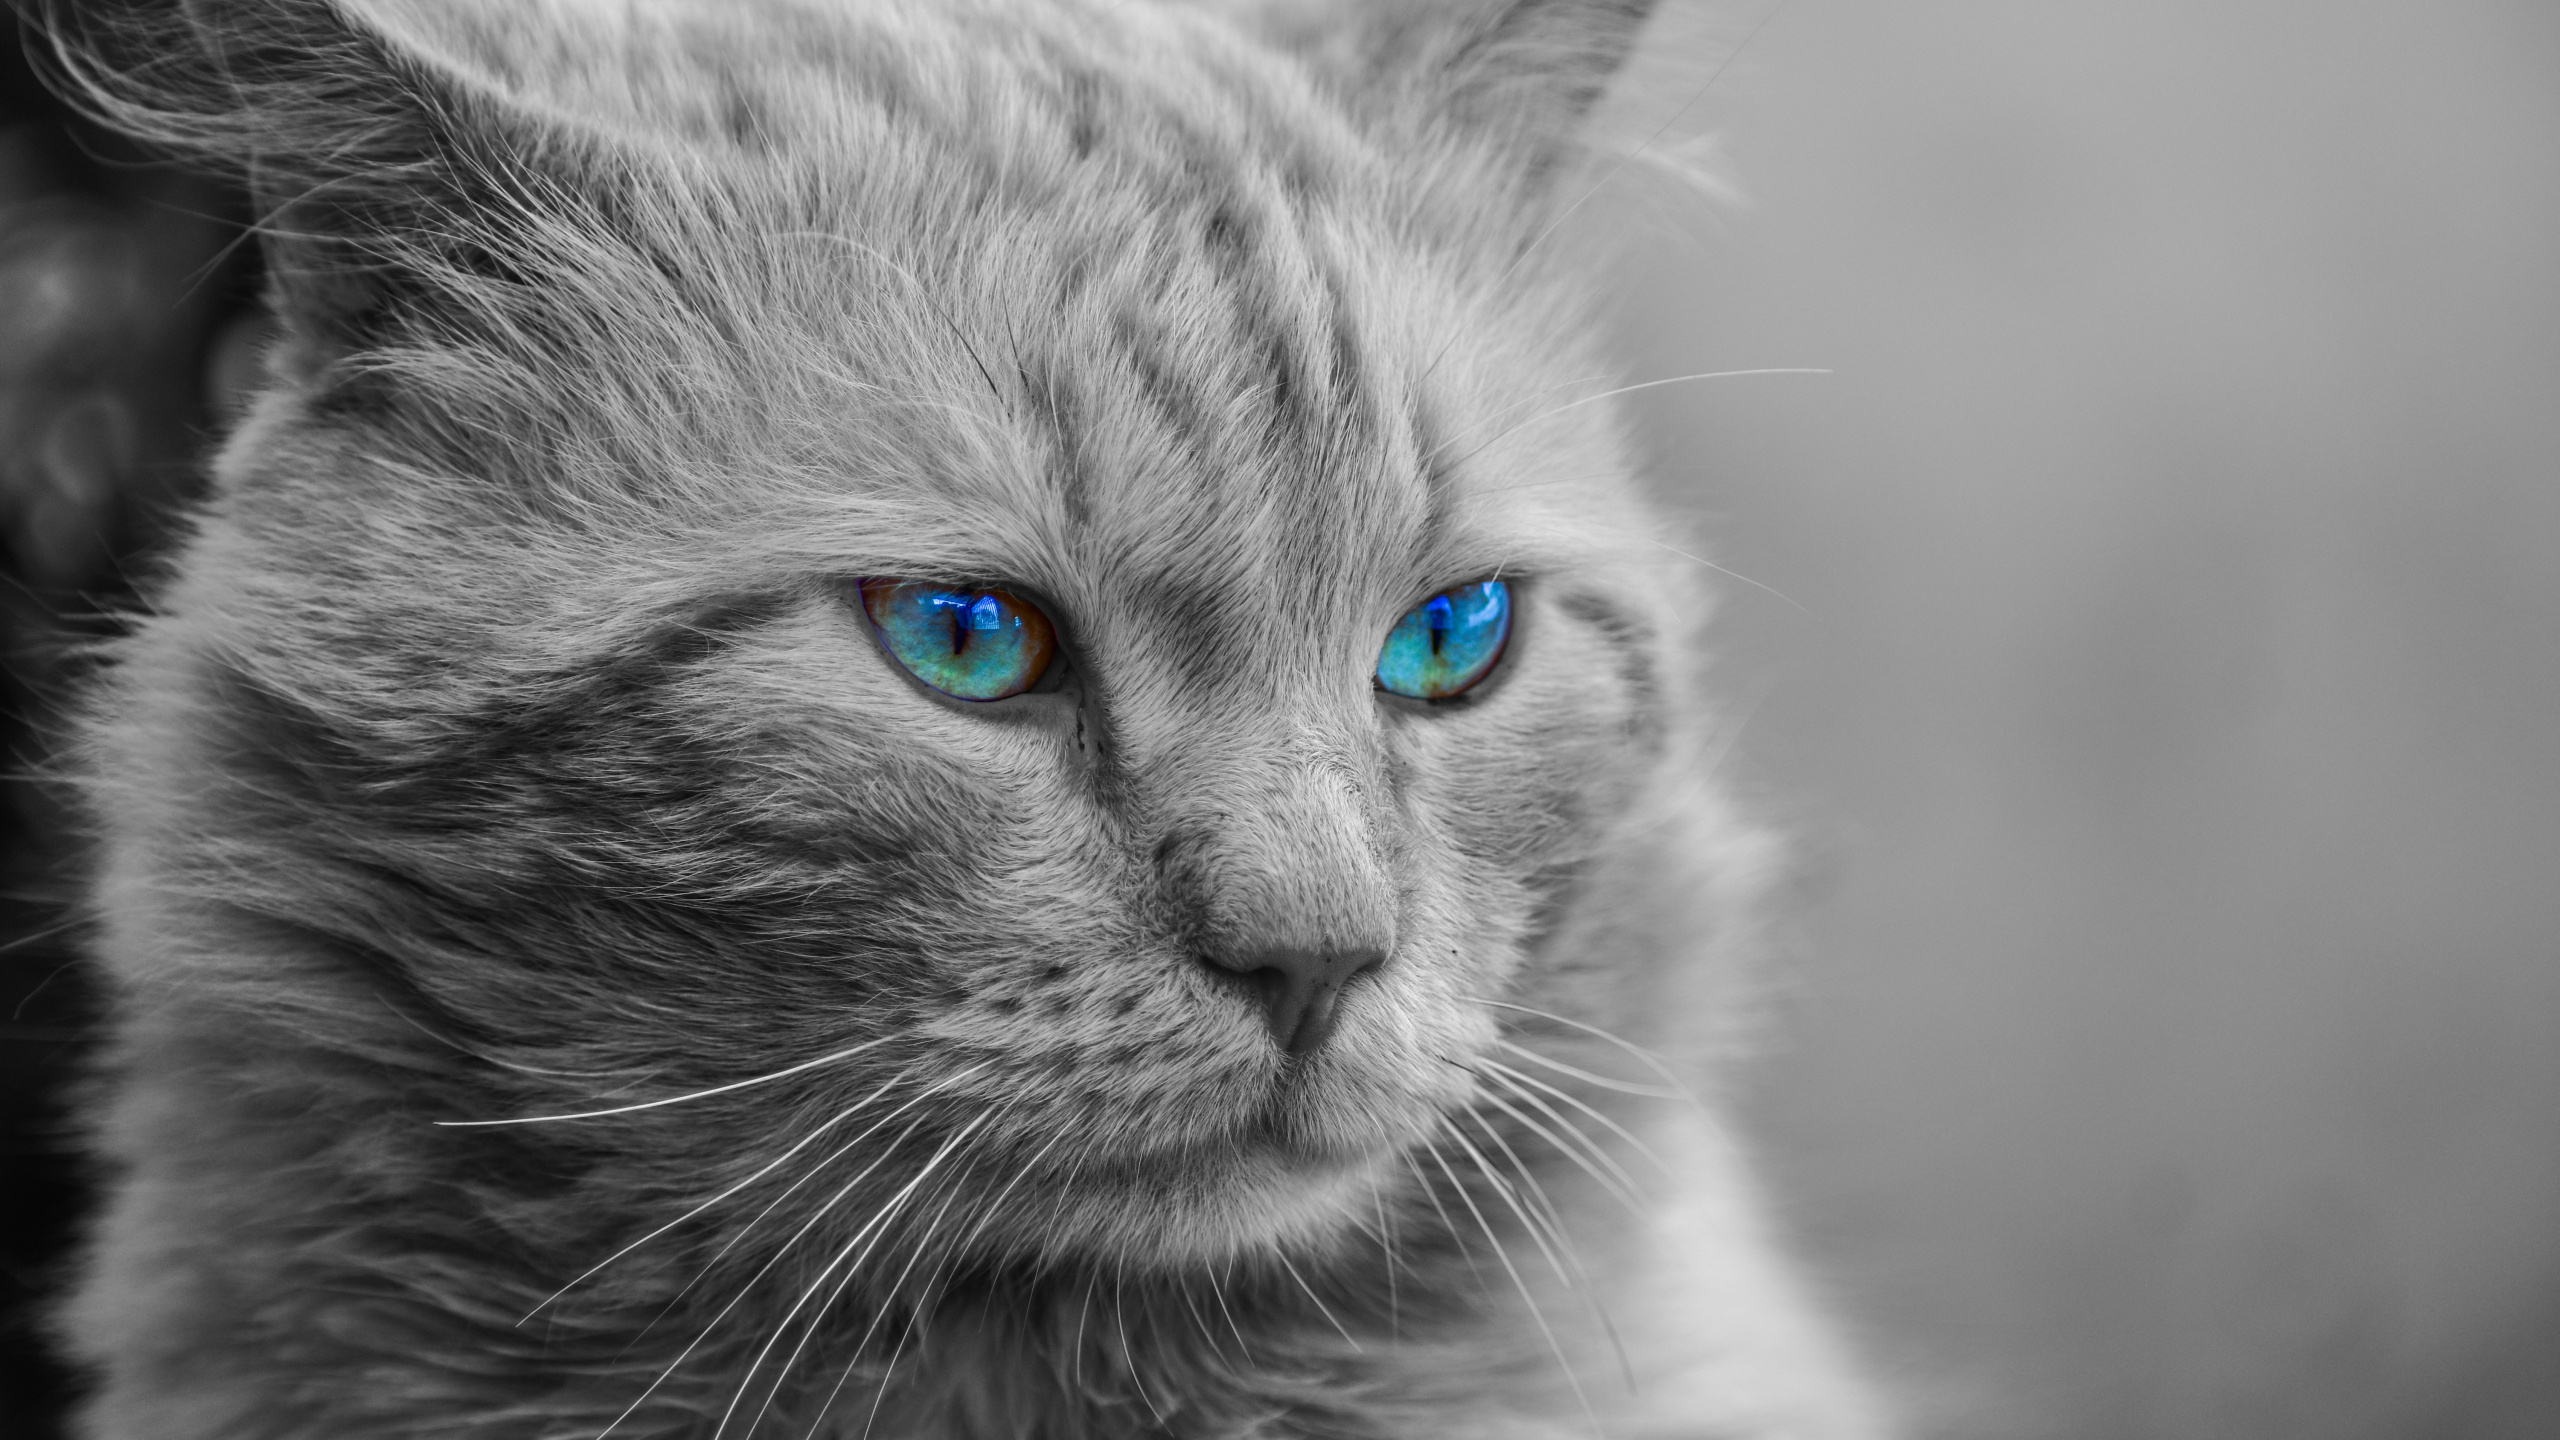 Grayscale Photo of Cat With Blue Eyes. Wallpaper in 2560x1440 Resolution